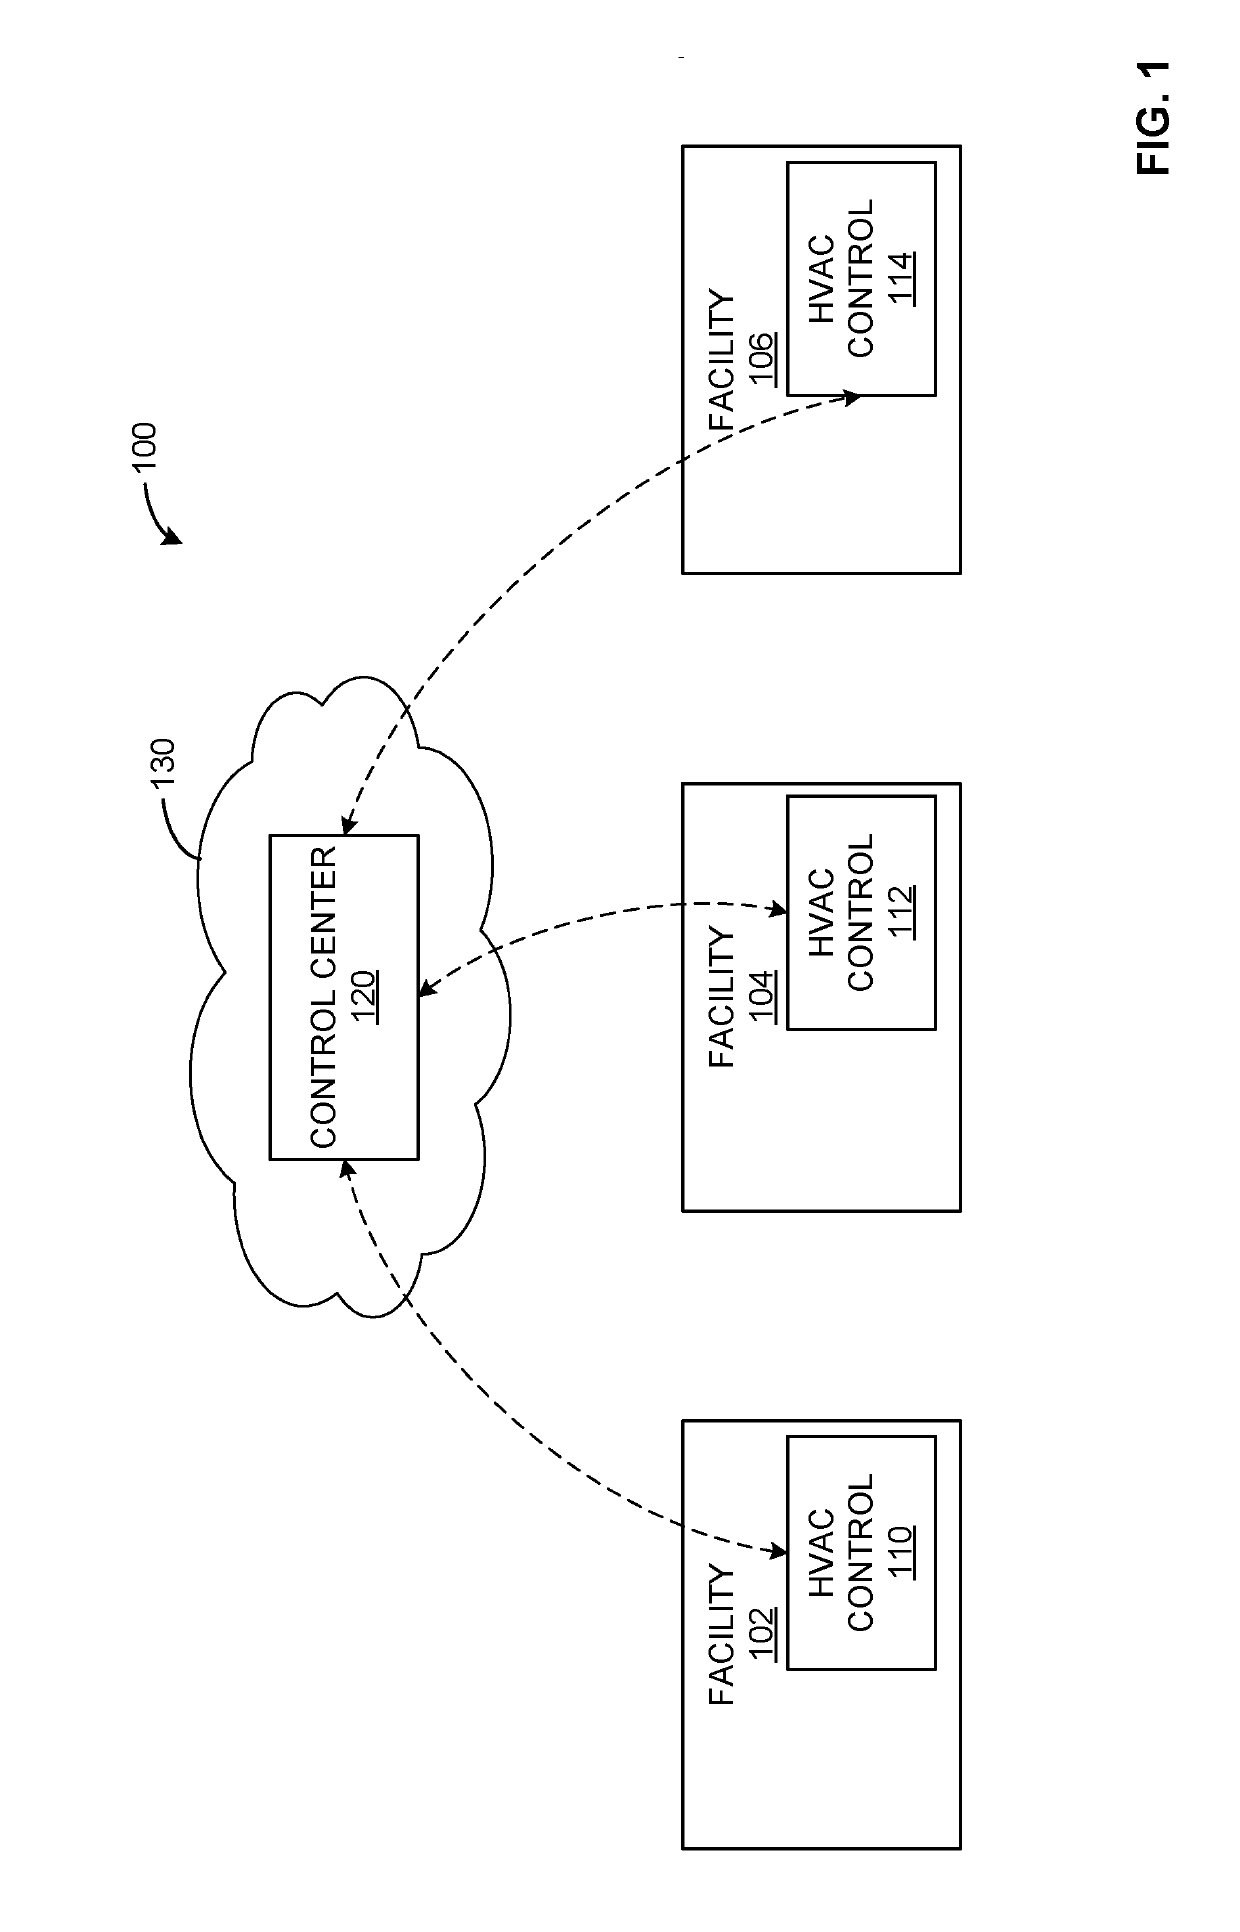 Apparatus and methods to synchronize edge device communications with a cloud broker